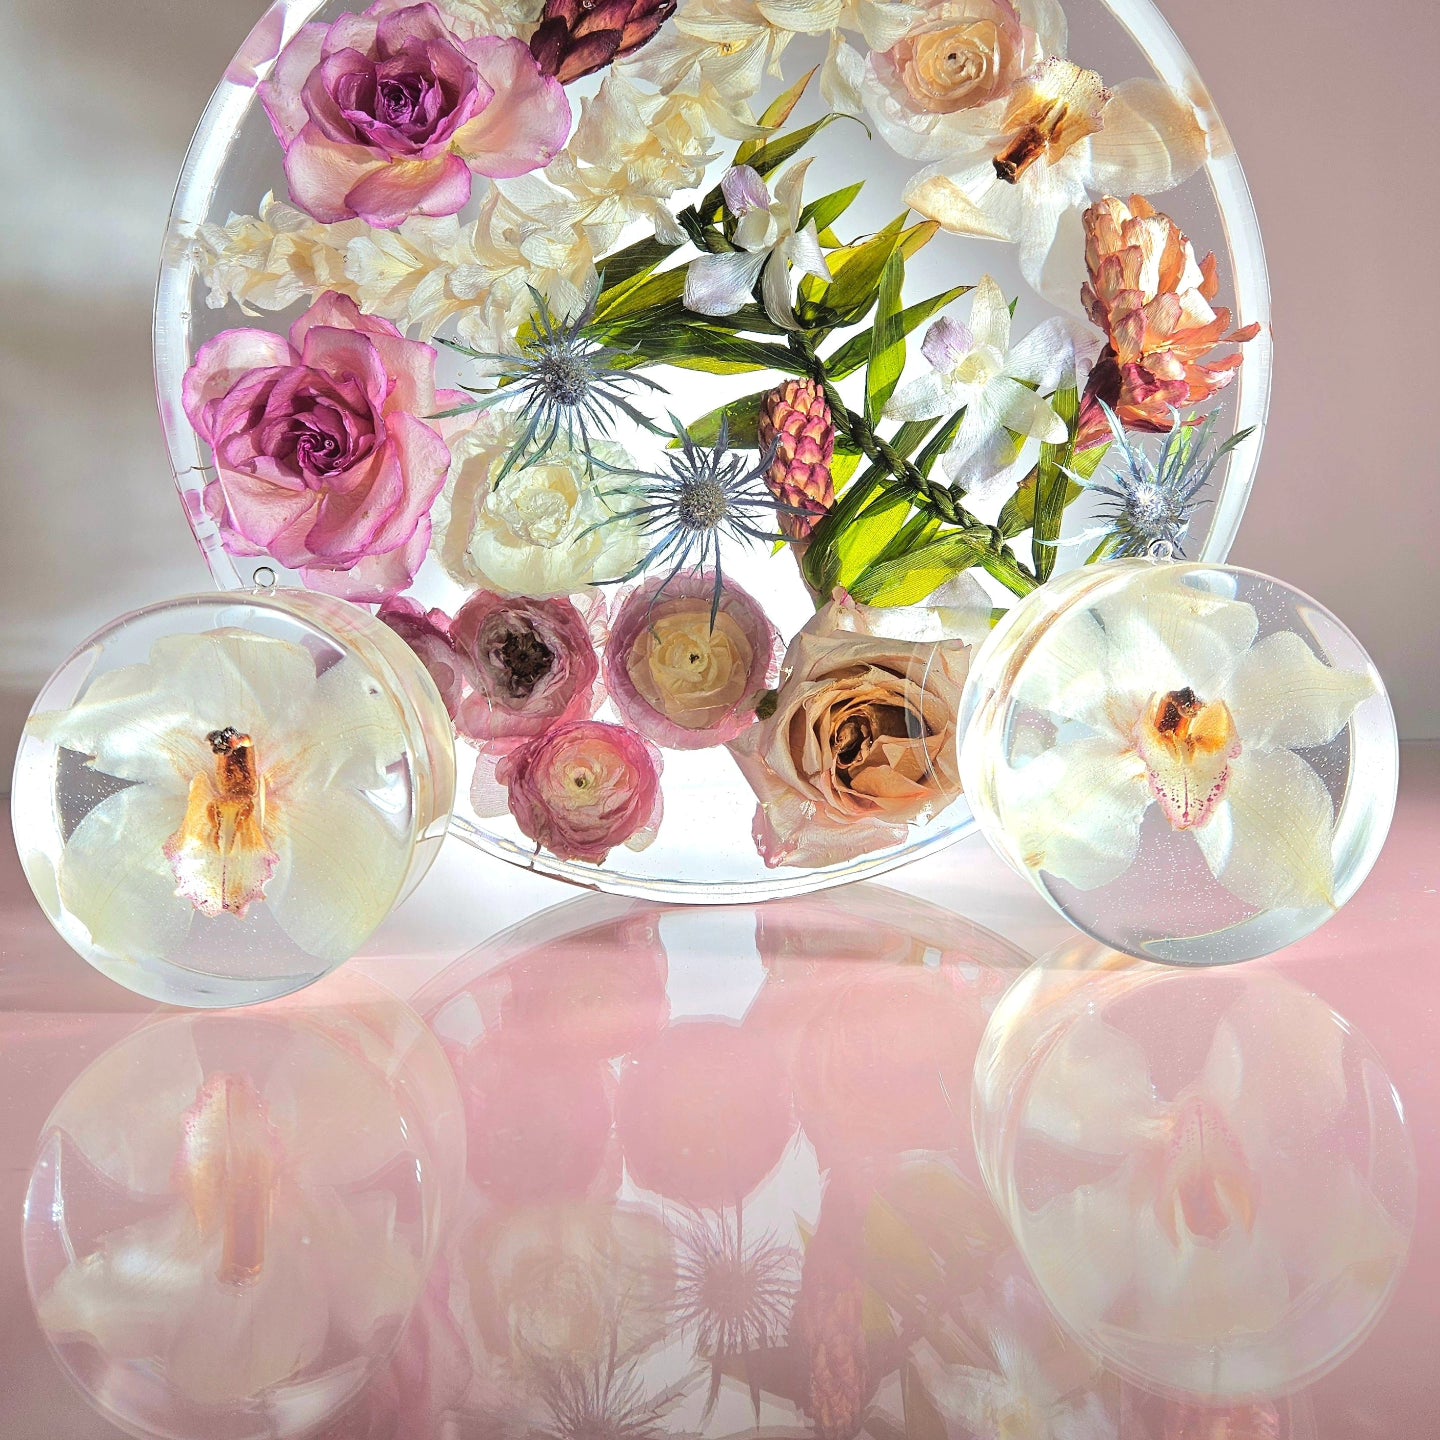 Wedding Flower Preservation Hanging 2" Thick Round Resin Plaque Add-on Item.  Made Using The Ribbon From Your Bouquet